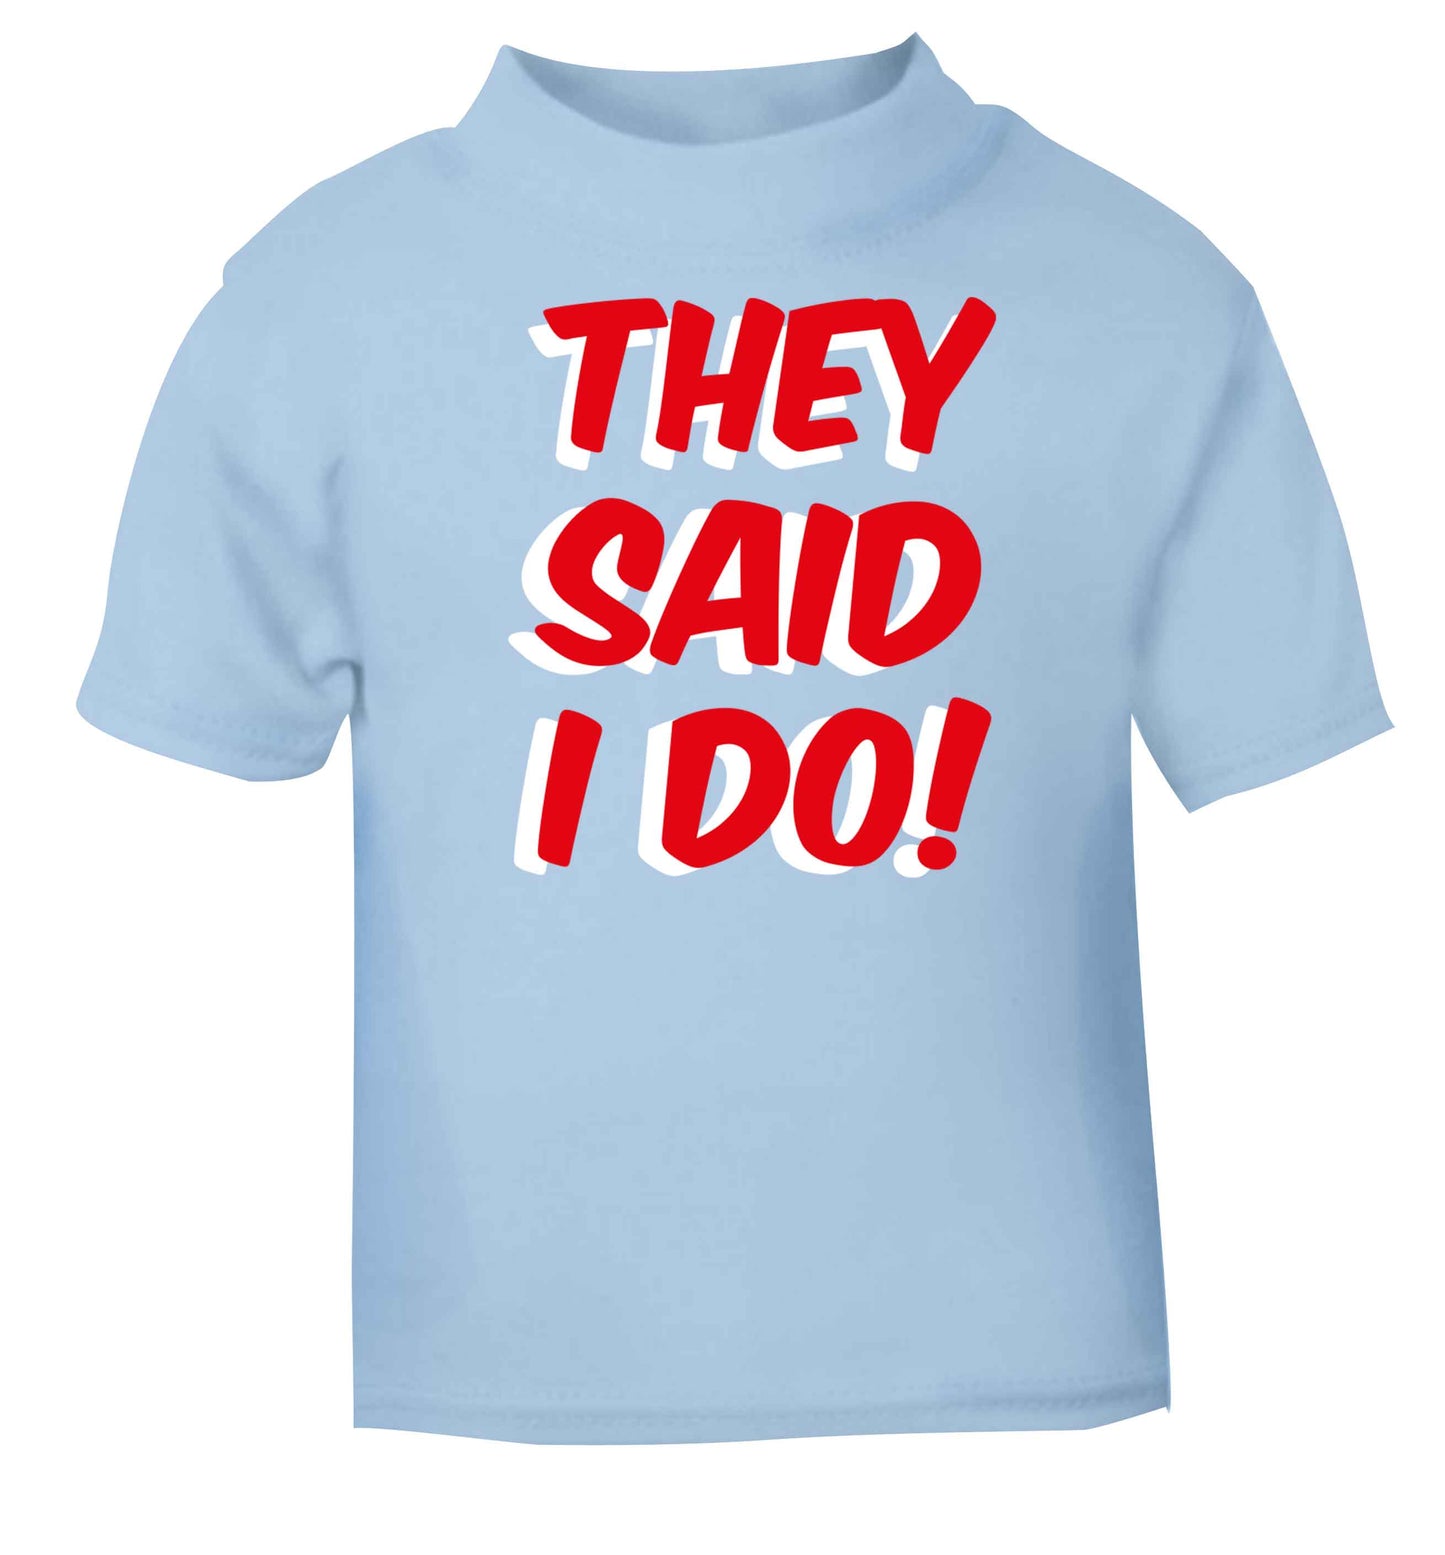 They said I do light blue baby toddler Tshirt 2 Years